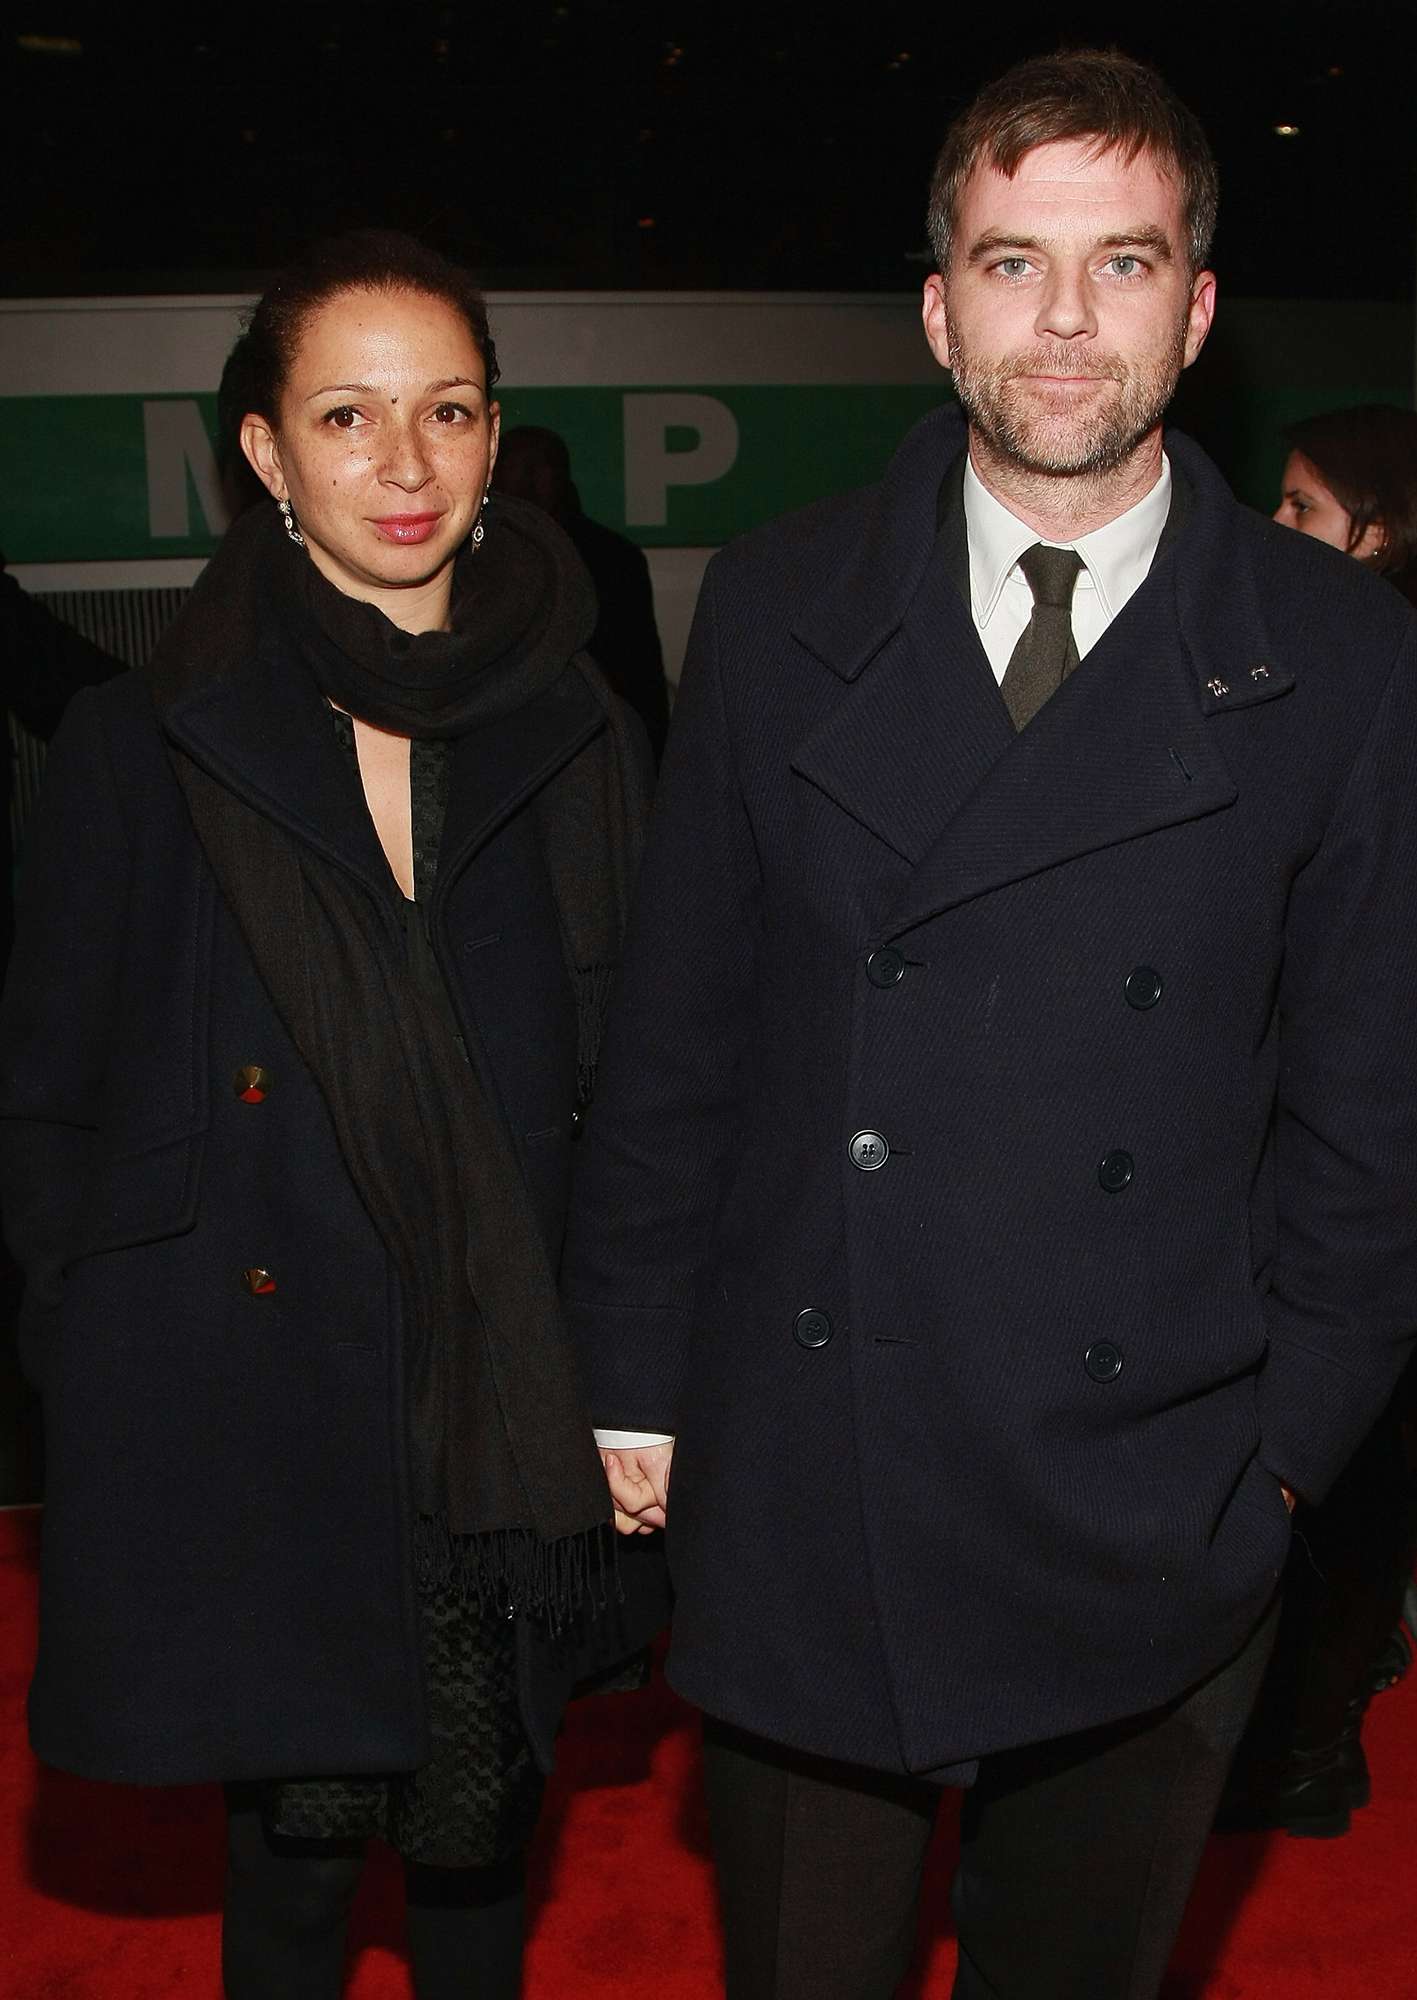 Maya Rudolph and director Paul Thomas Anderson arrive at the "There Will Be Blood" Premiere at the Ziegfeld Theater on December 10, 2007 in New York City